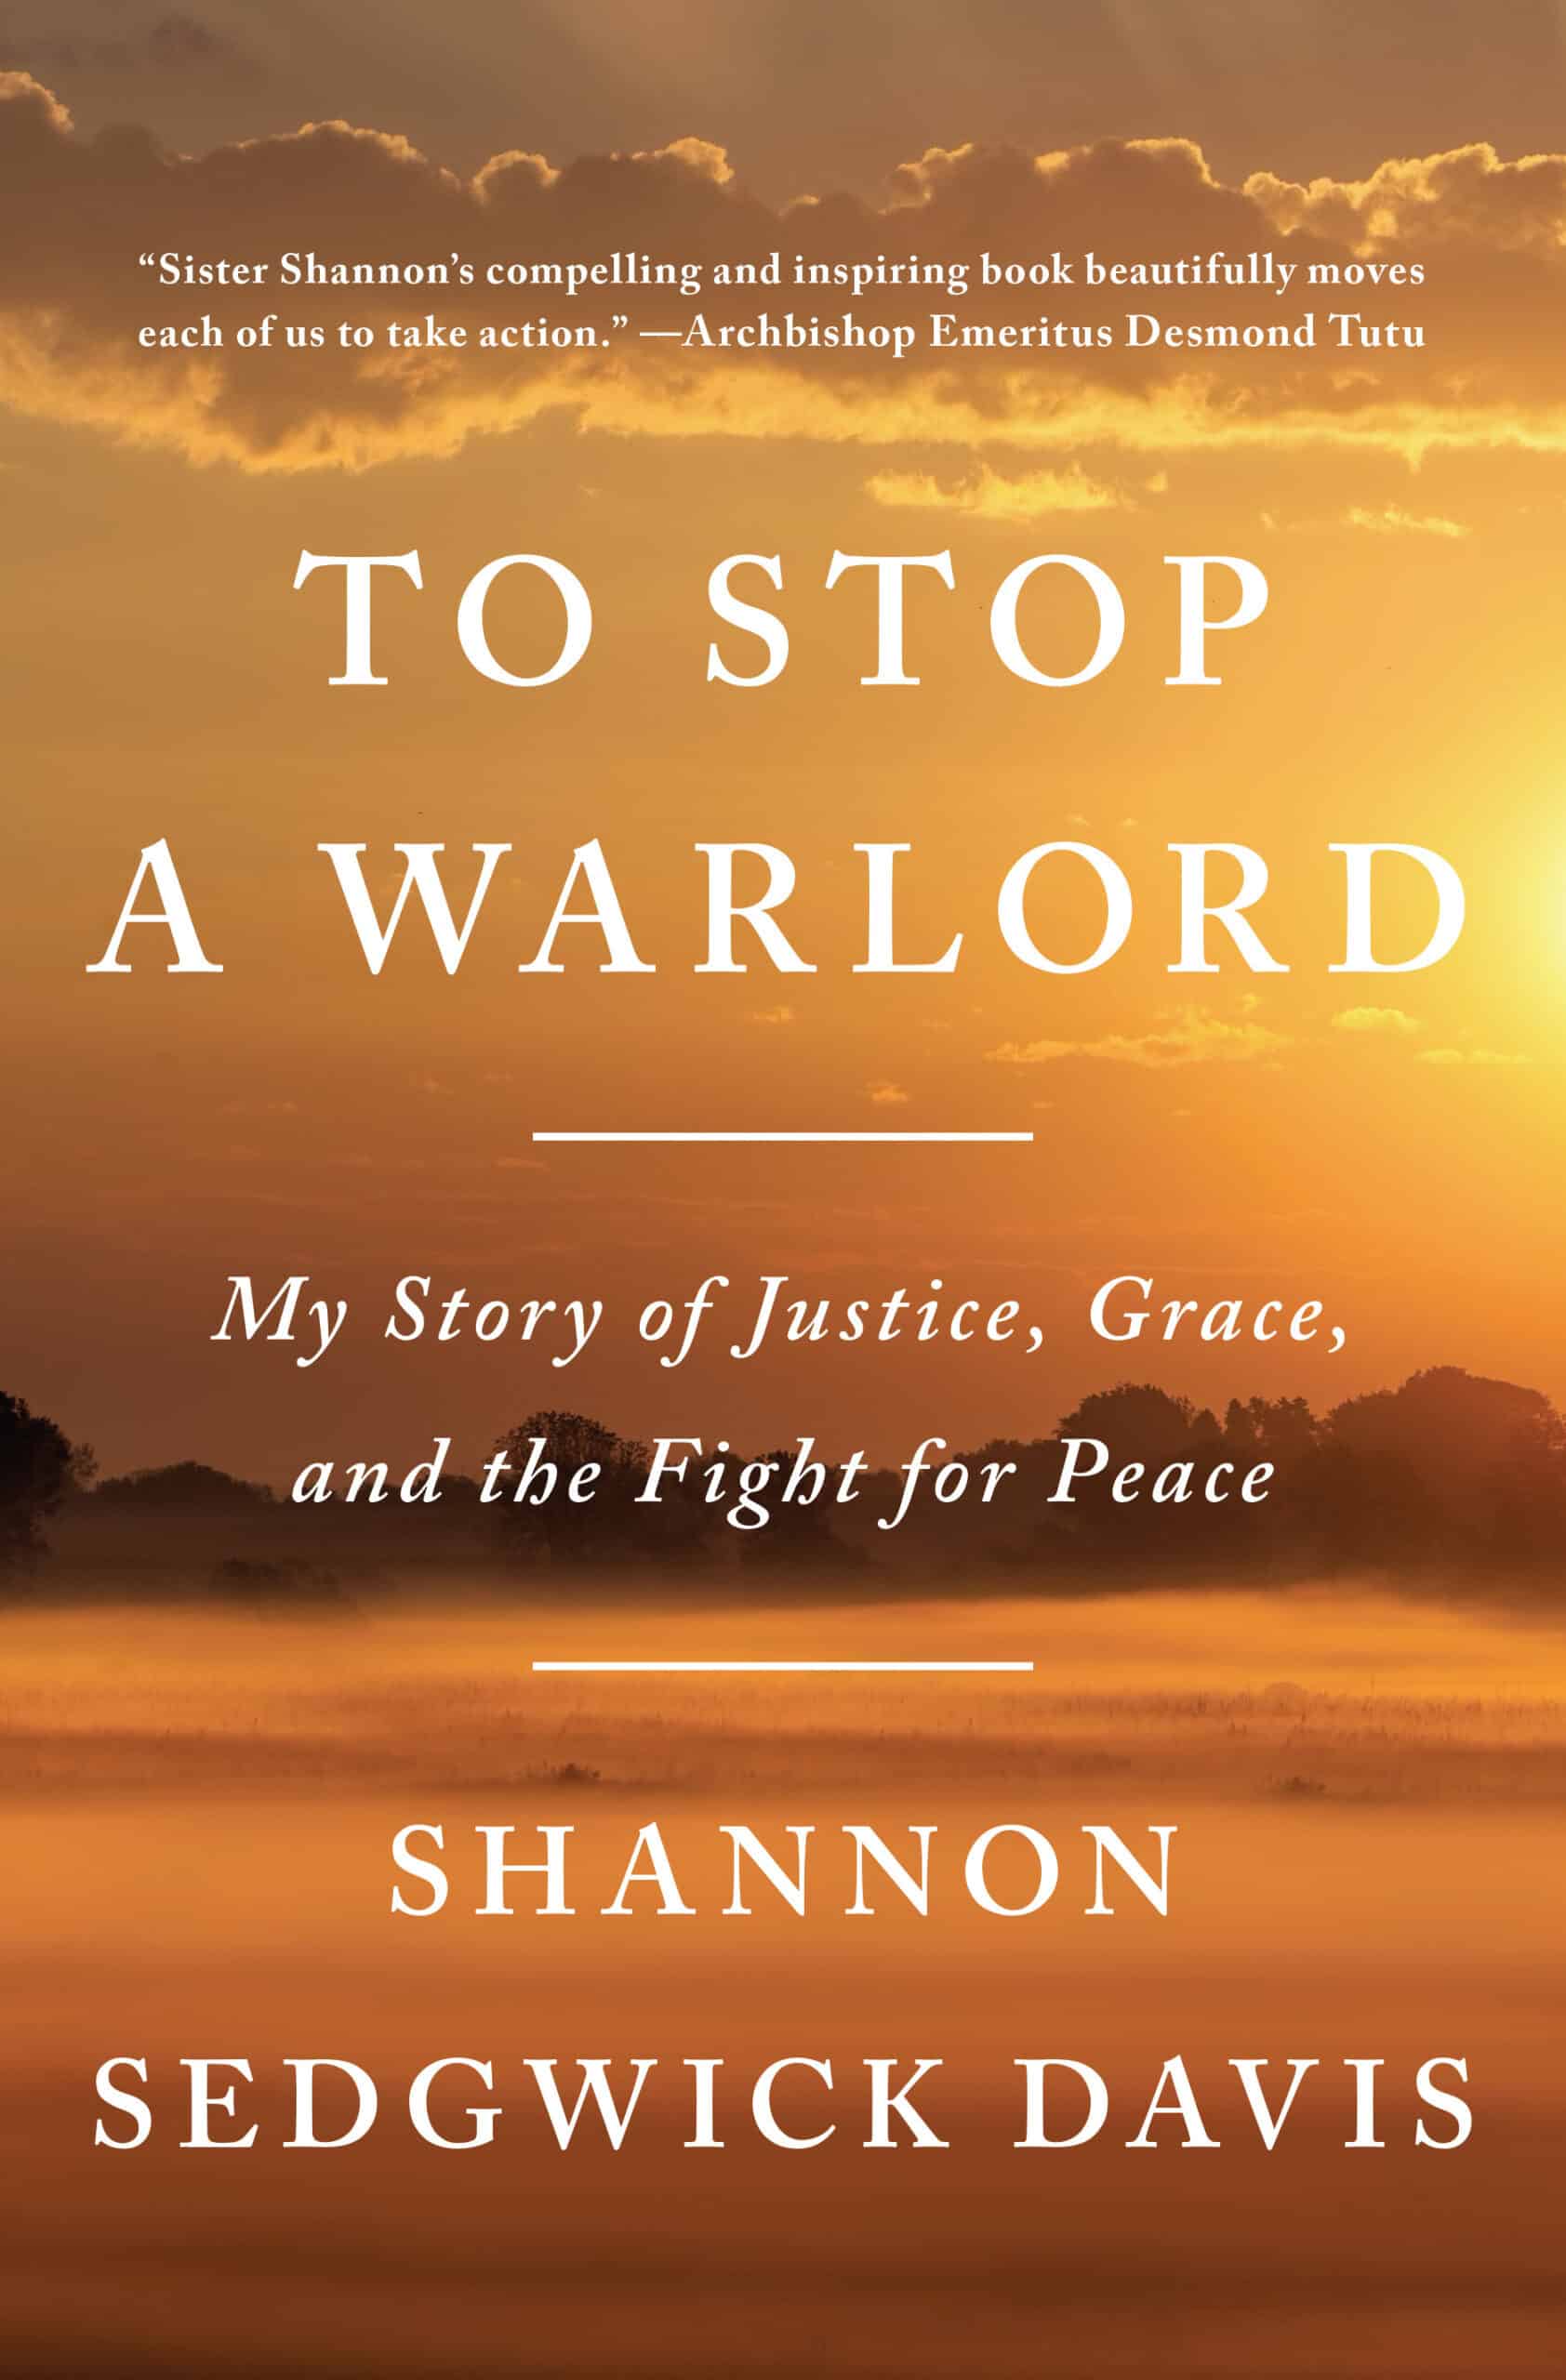 To Stop a Warlord - Shannon Sedgwick Davis